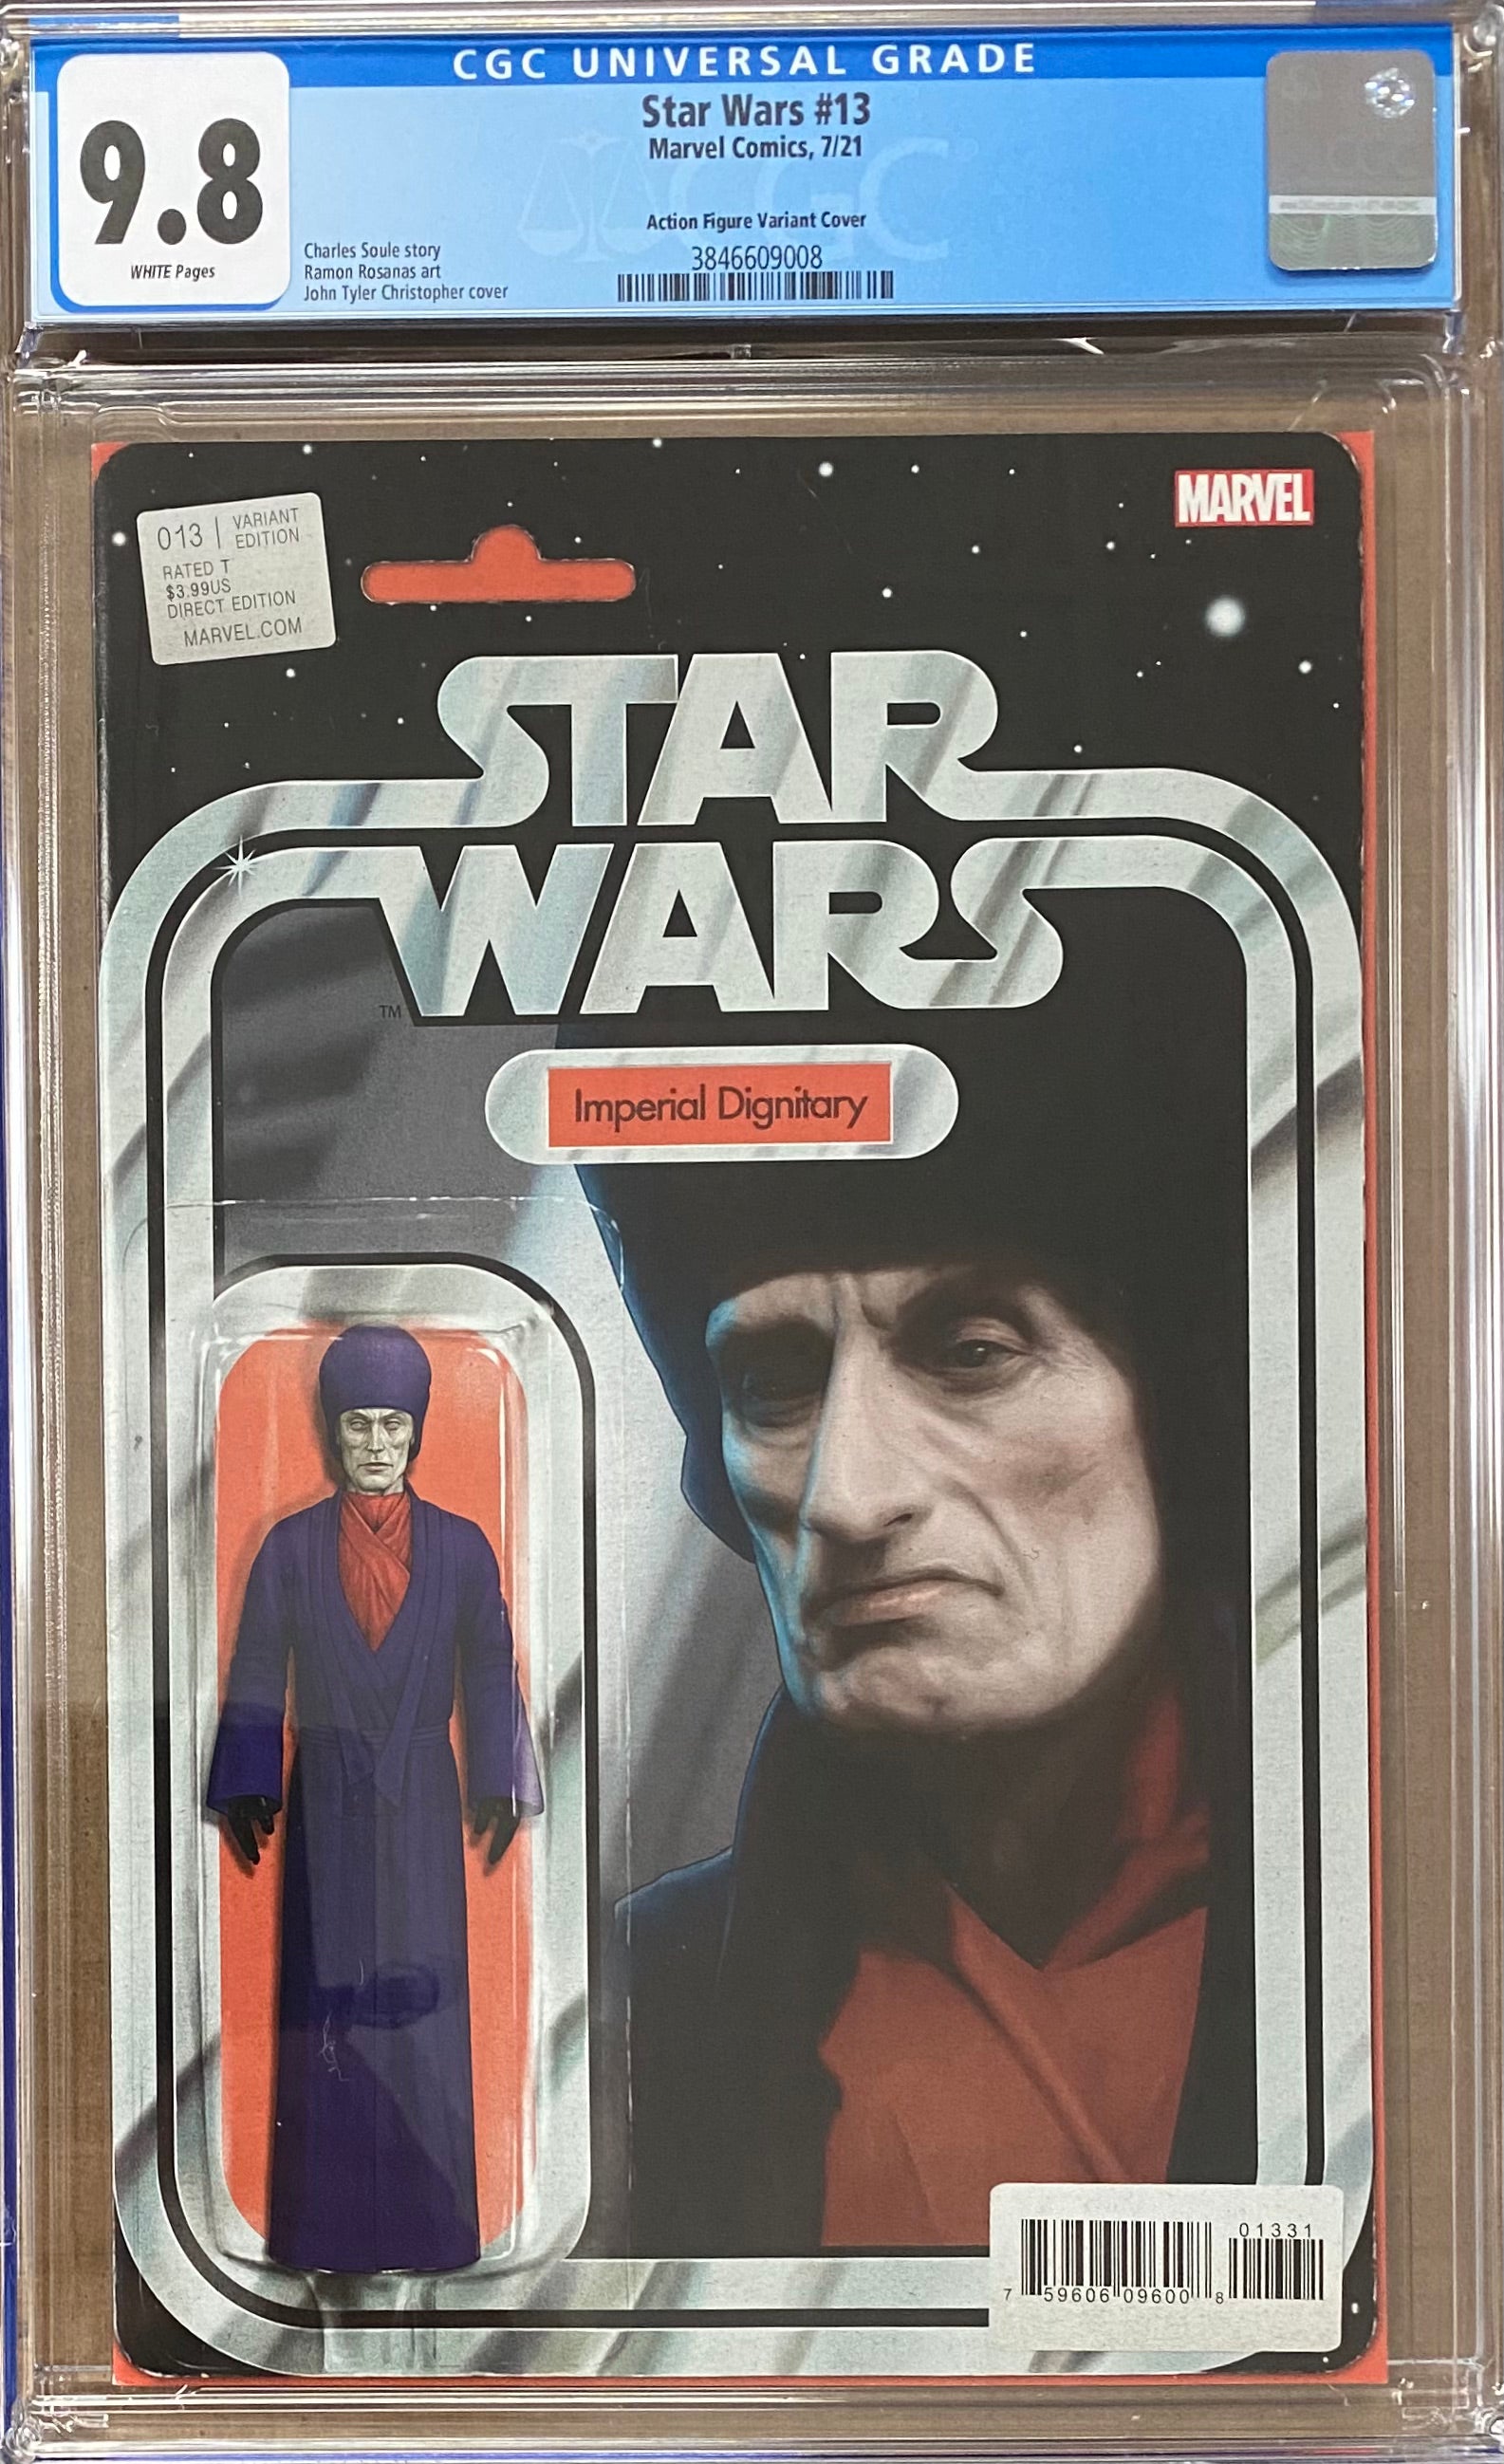 Star Wars #13 Action Figure Variant CGC 9.8 - War of the Bounty Hunters